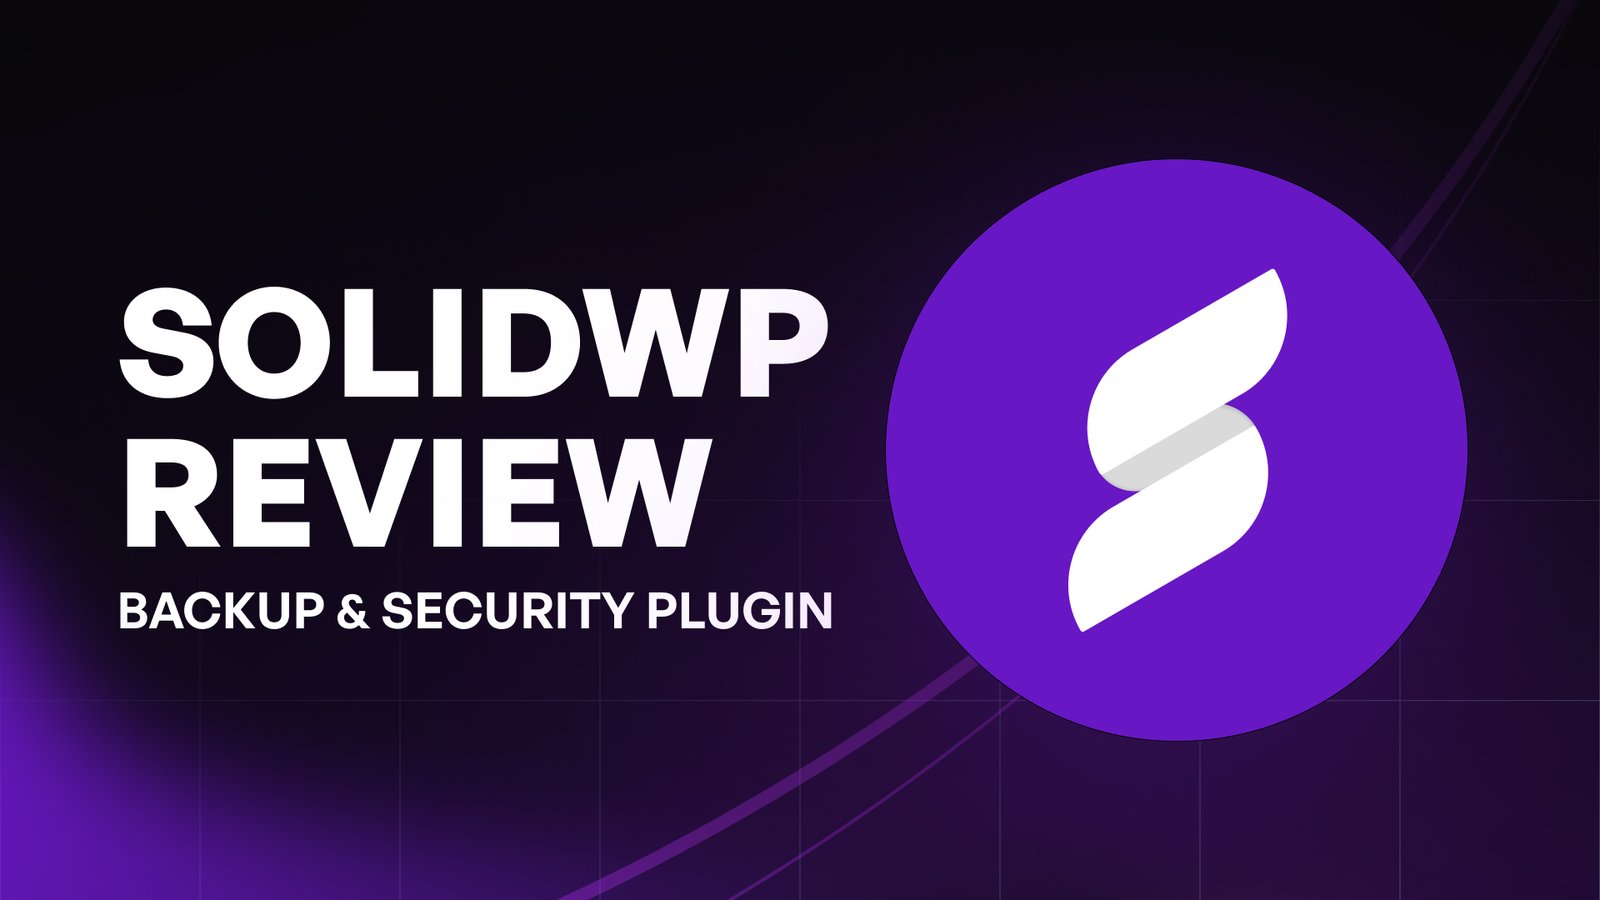 SolidWP review banner showcasing the logo and emphasizing backup and security plugin features, offering reliable and comprehensive WordPress support.